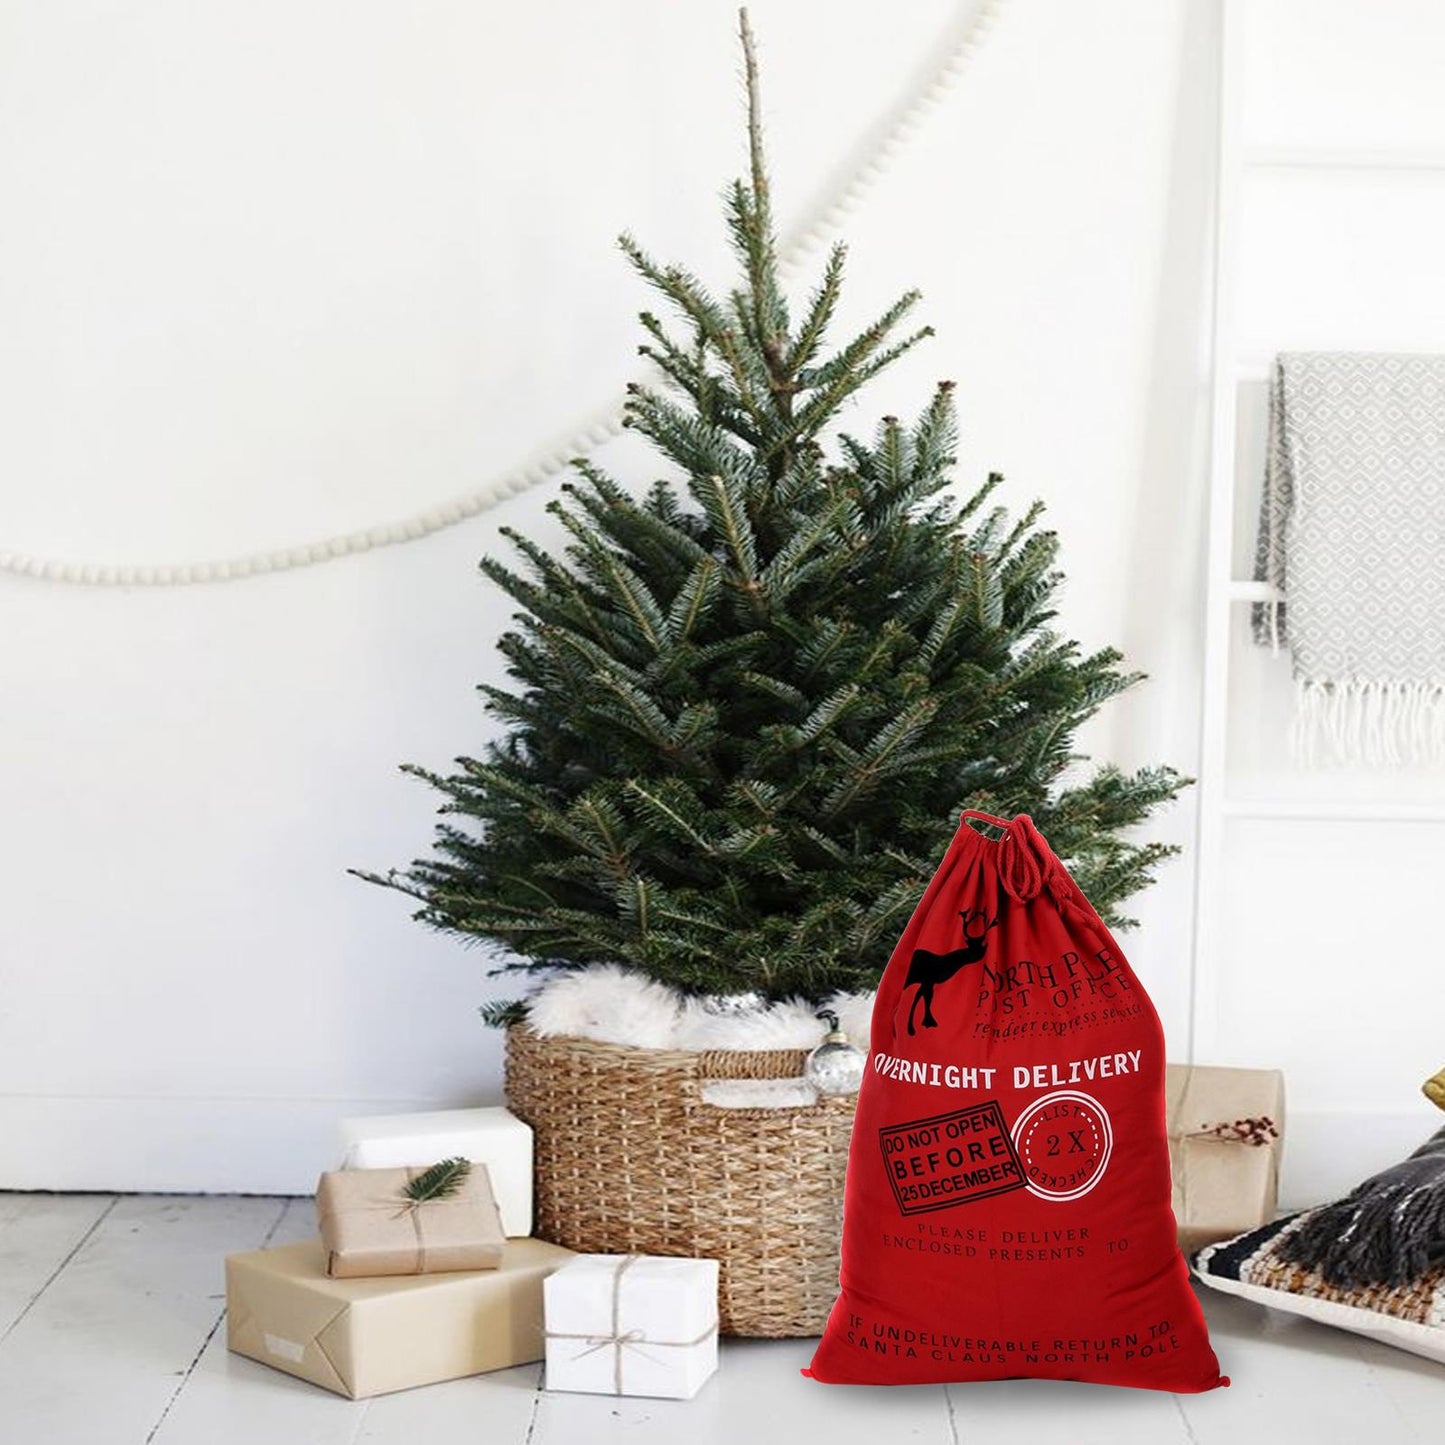 Festive Christmas Decorations and Hanging Gifts Ideas